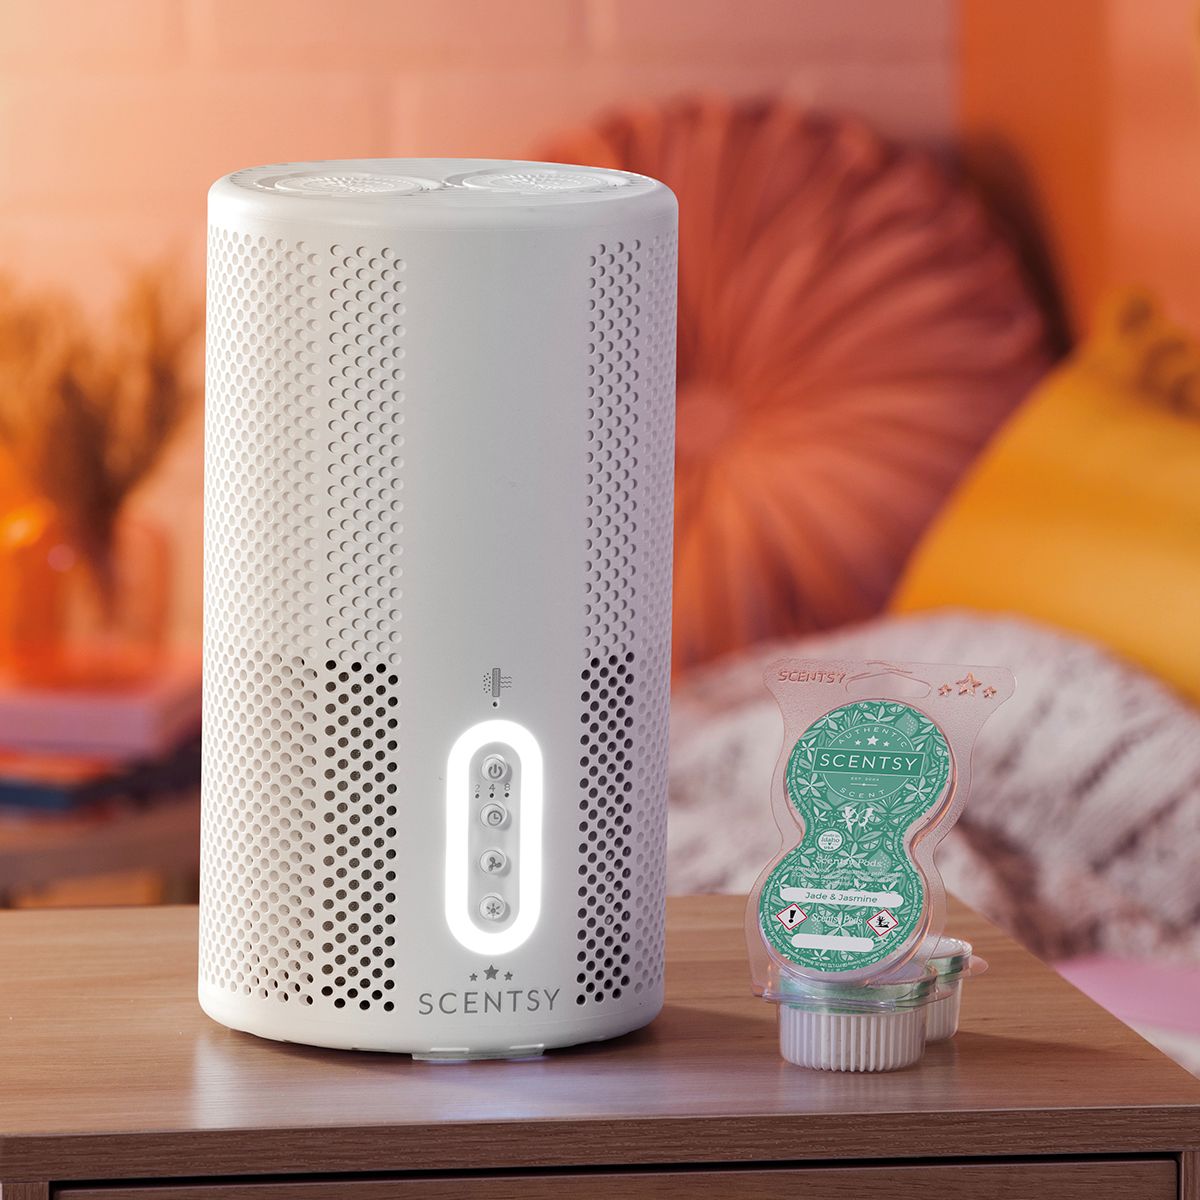 Scentsy Air Purifier and scented pods